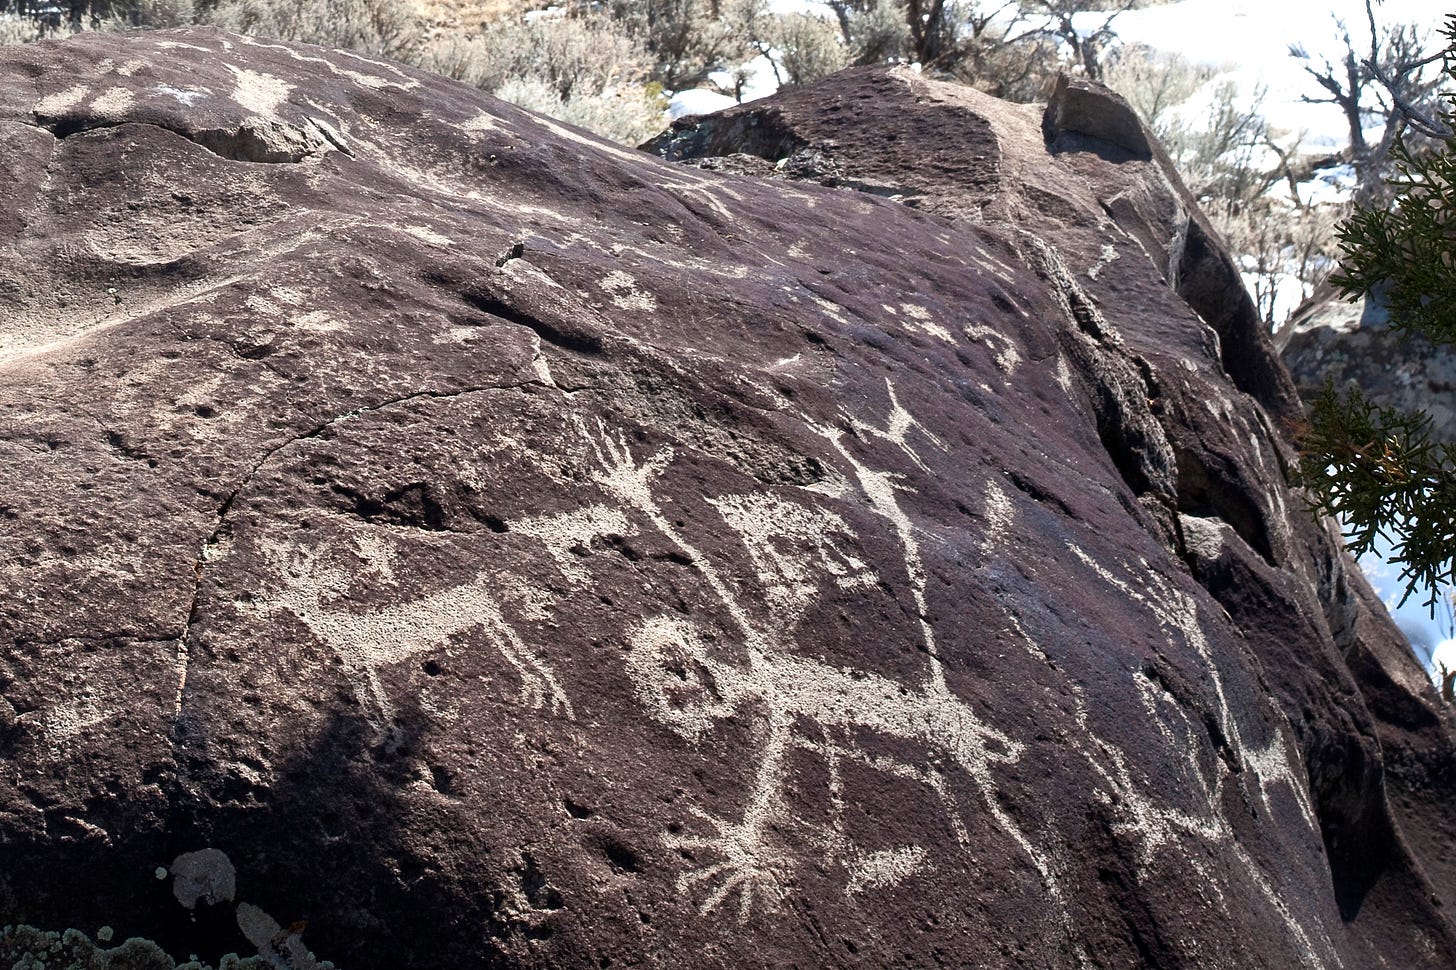 image of rock art in the Rio Grande Gorge National Monument depicting elk, sheep and a man with a big wiener